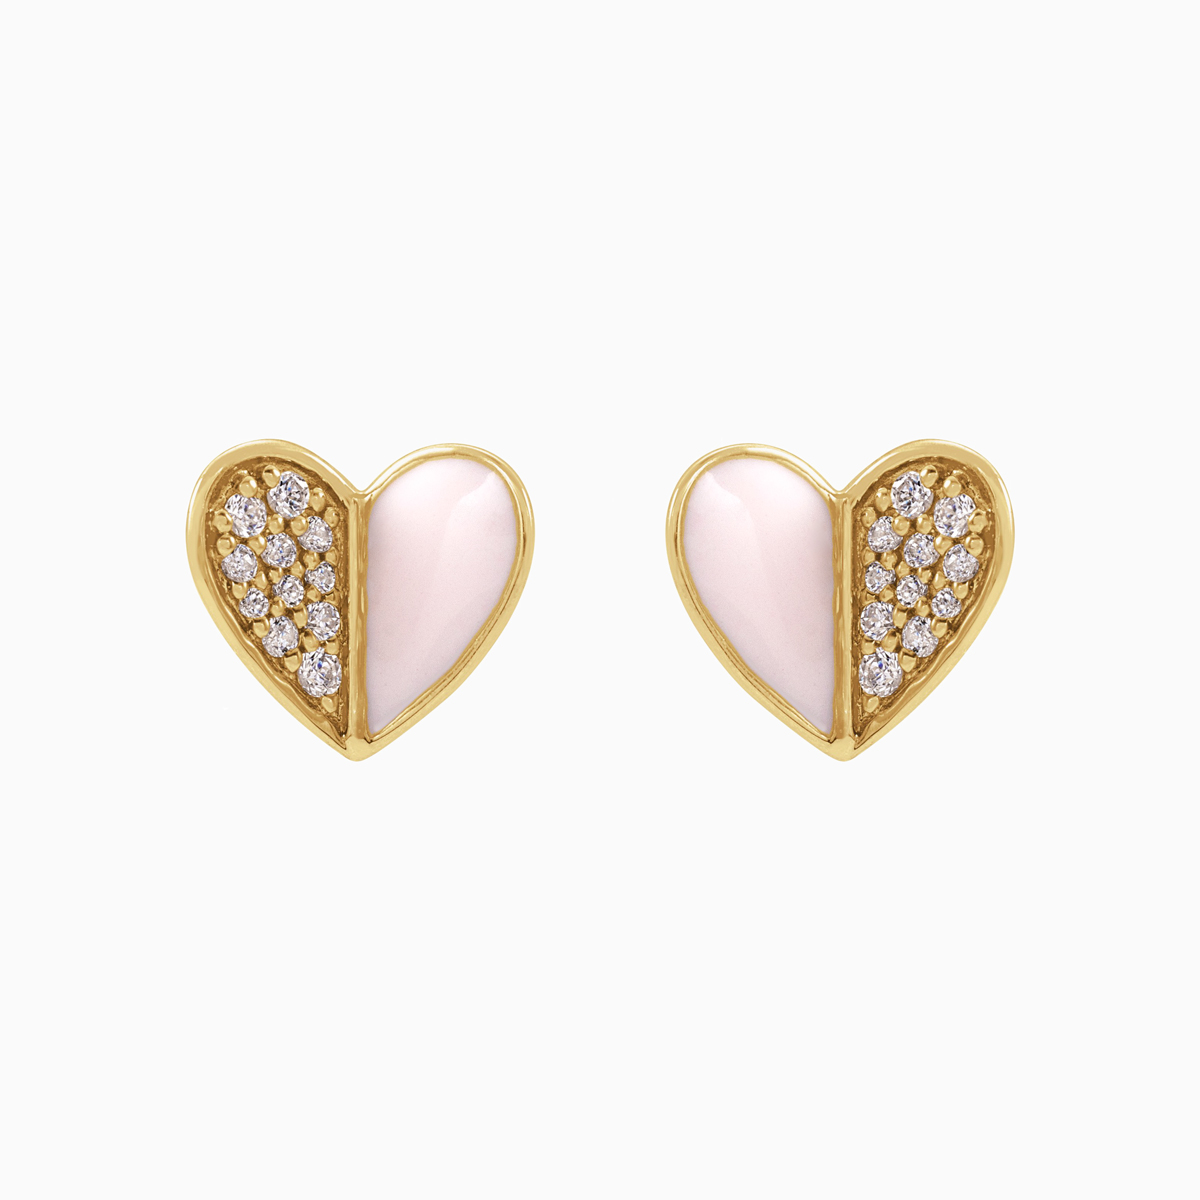 Natural Diamond Accented Pink Enameled Heart Earrings, 14k Yellow Gold